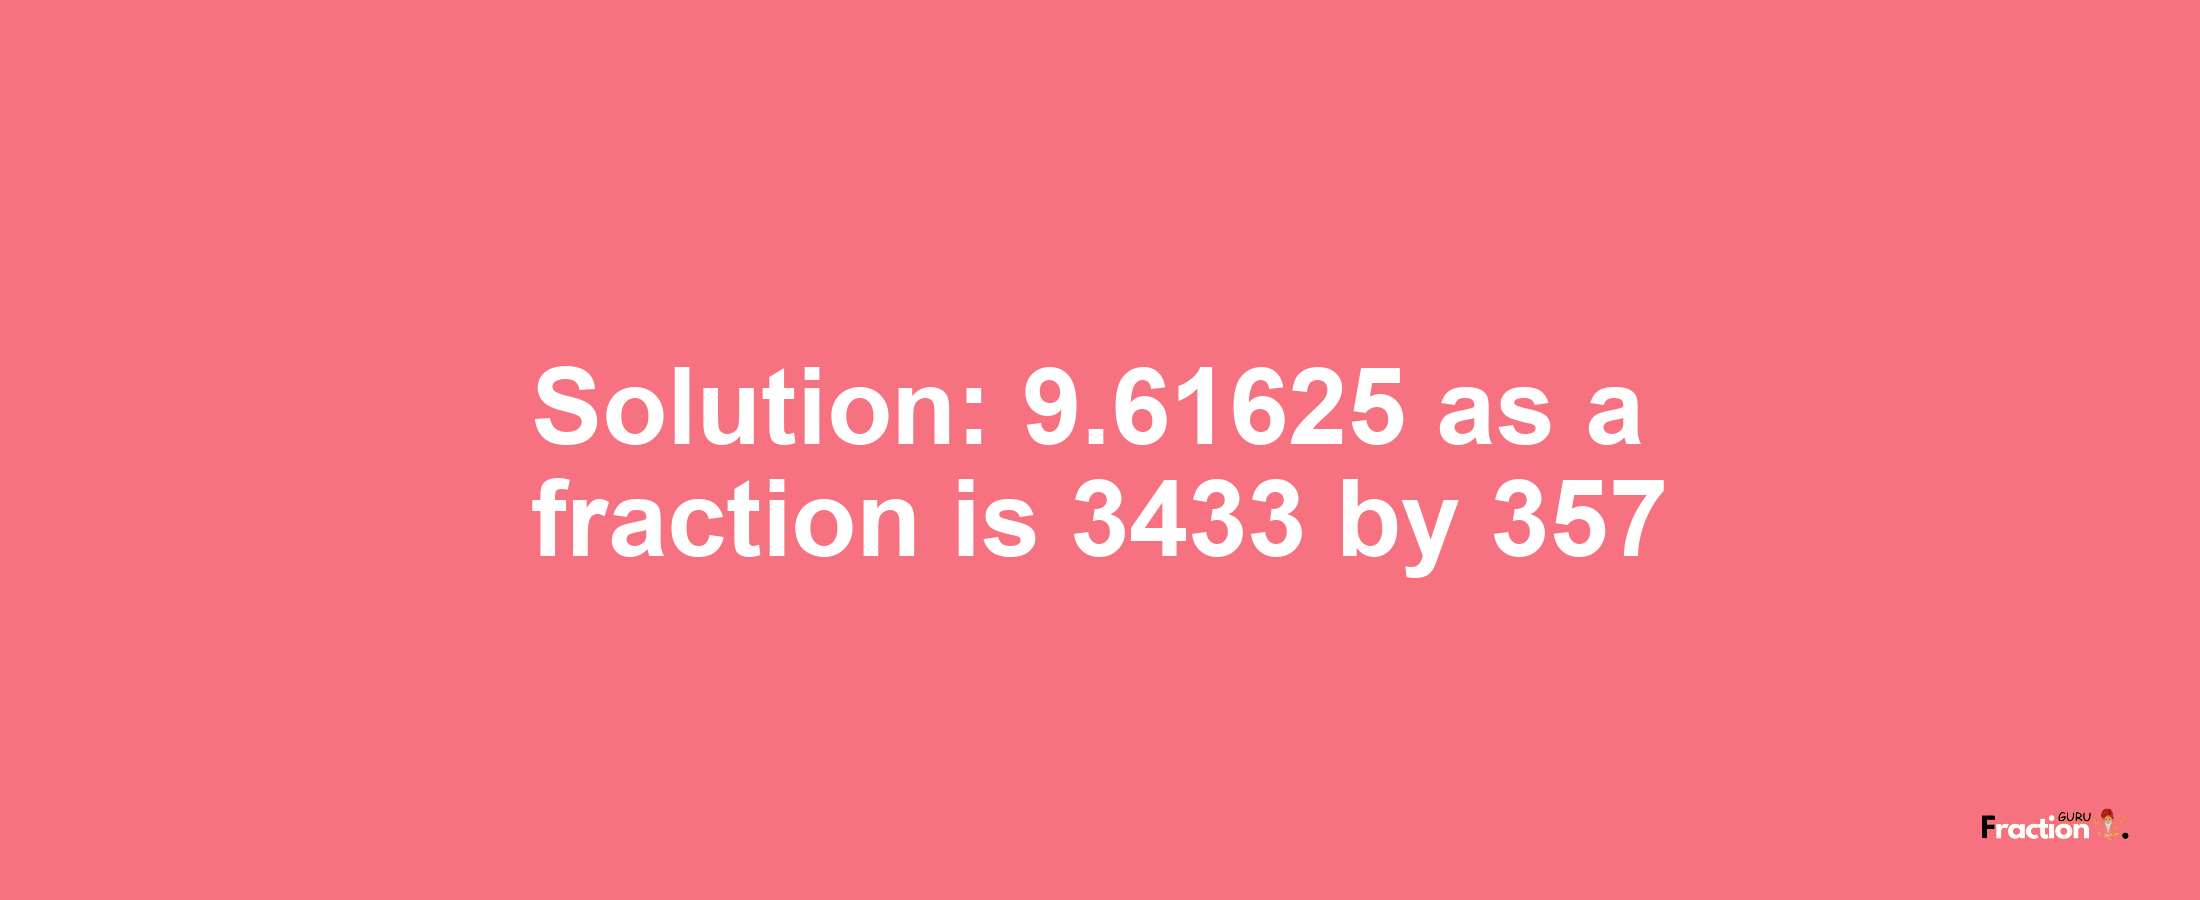 Solution:9.61625 as a fraction is 3433/357